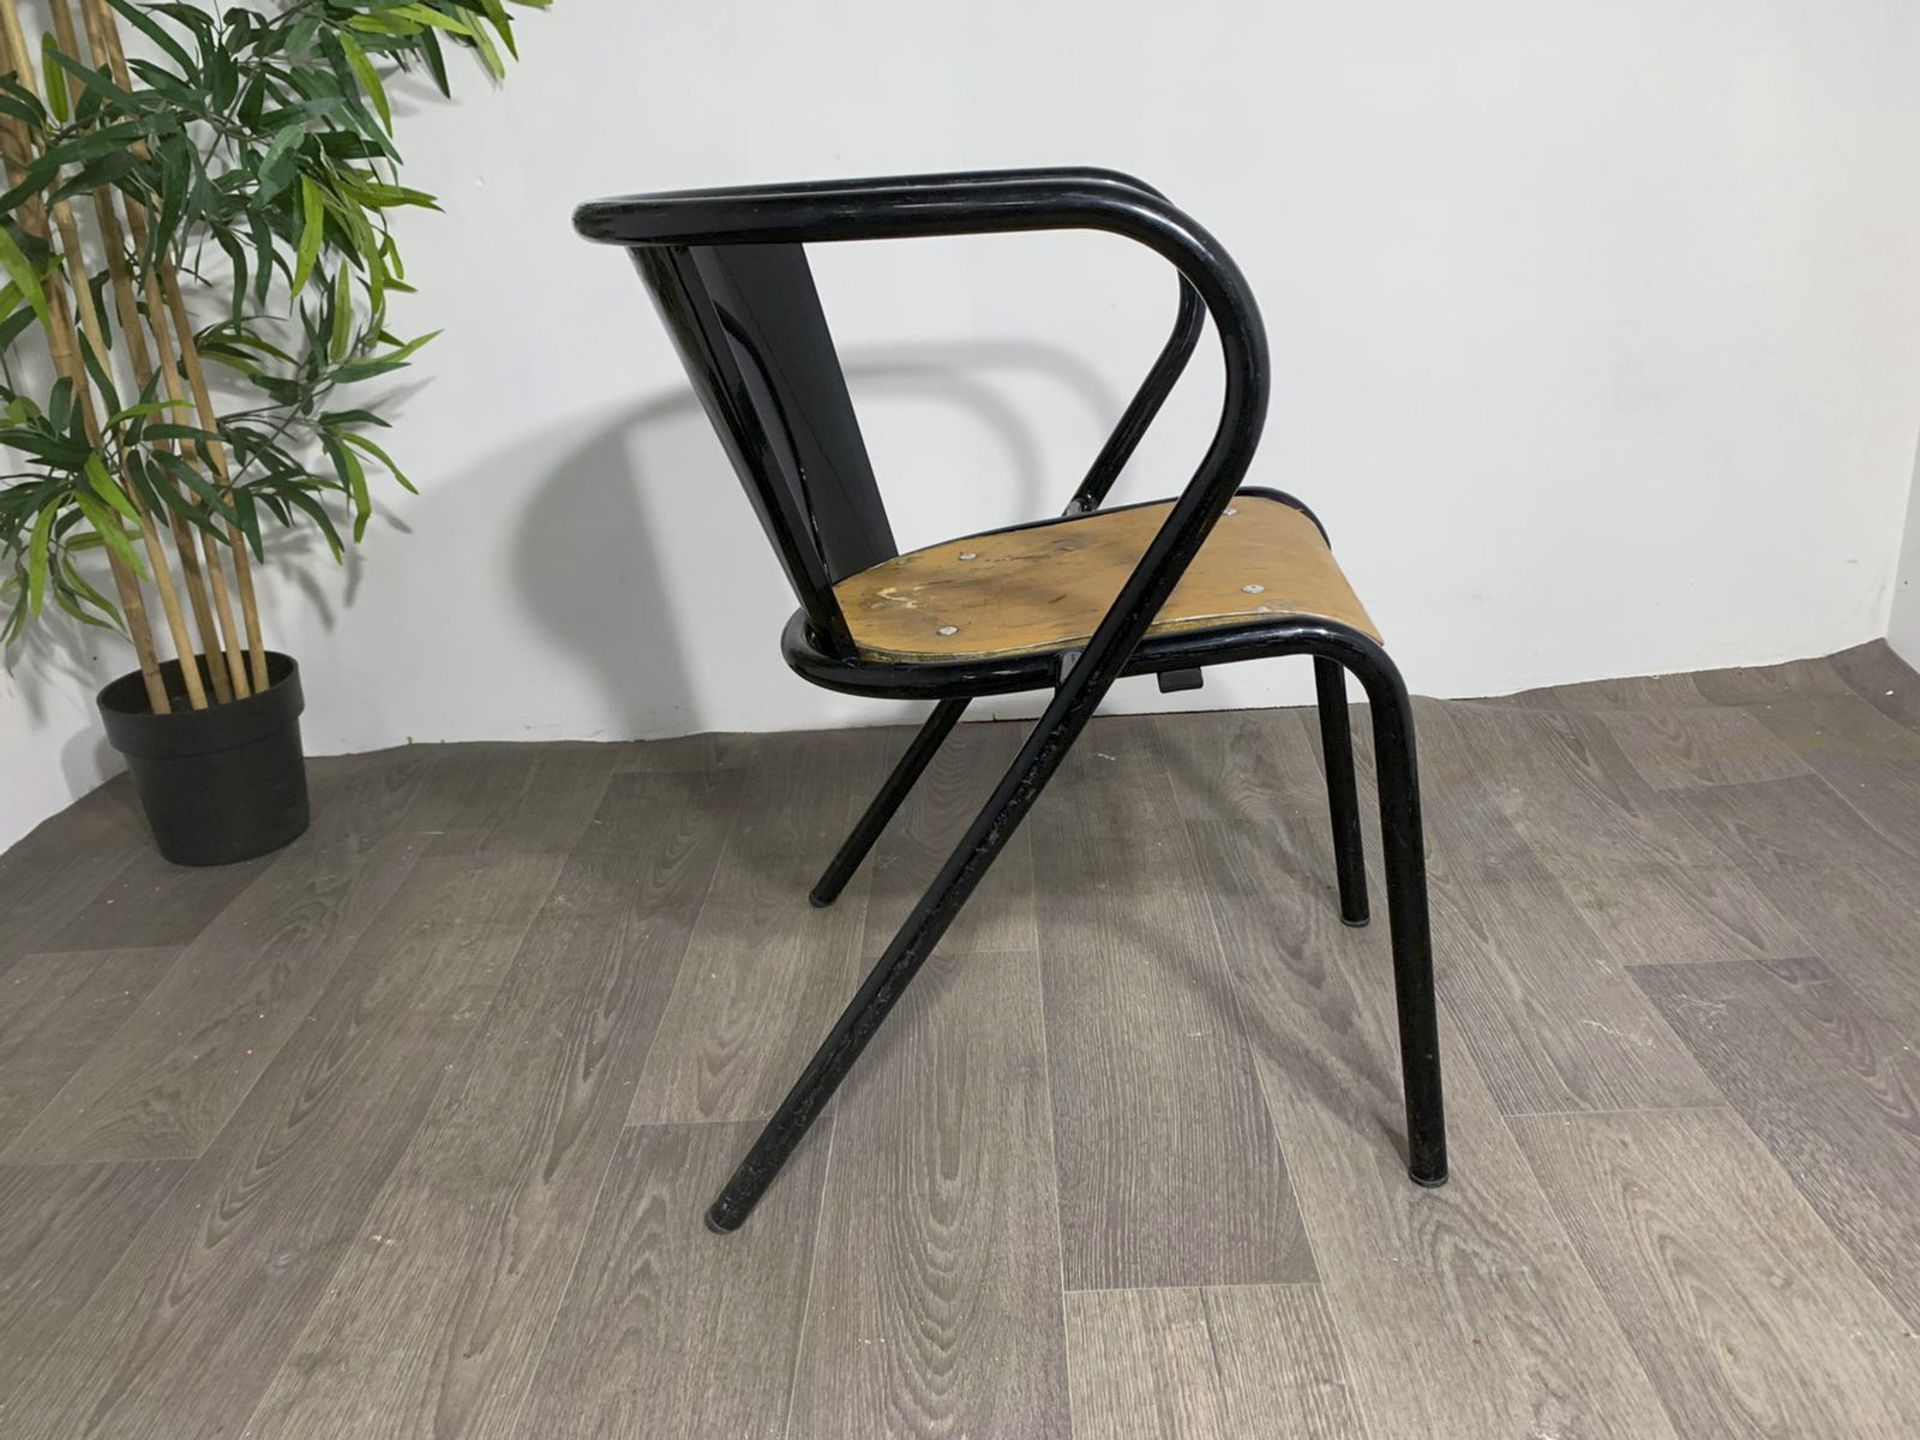 Adico 5008 Black Chair With Wooden Seat - Image 4 of 8